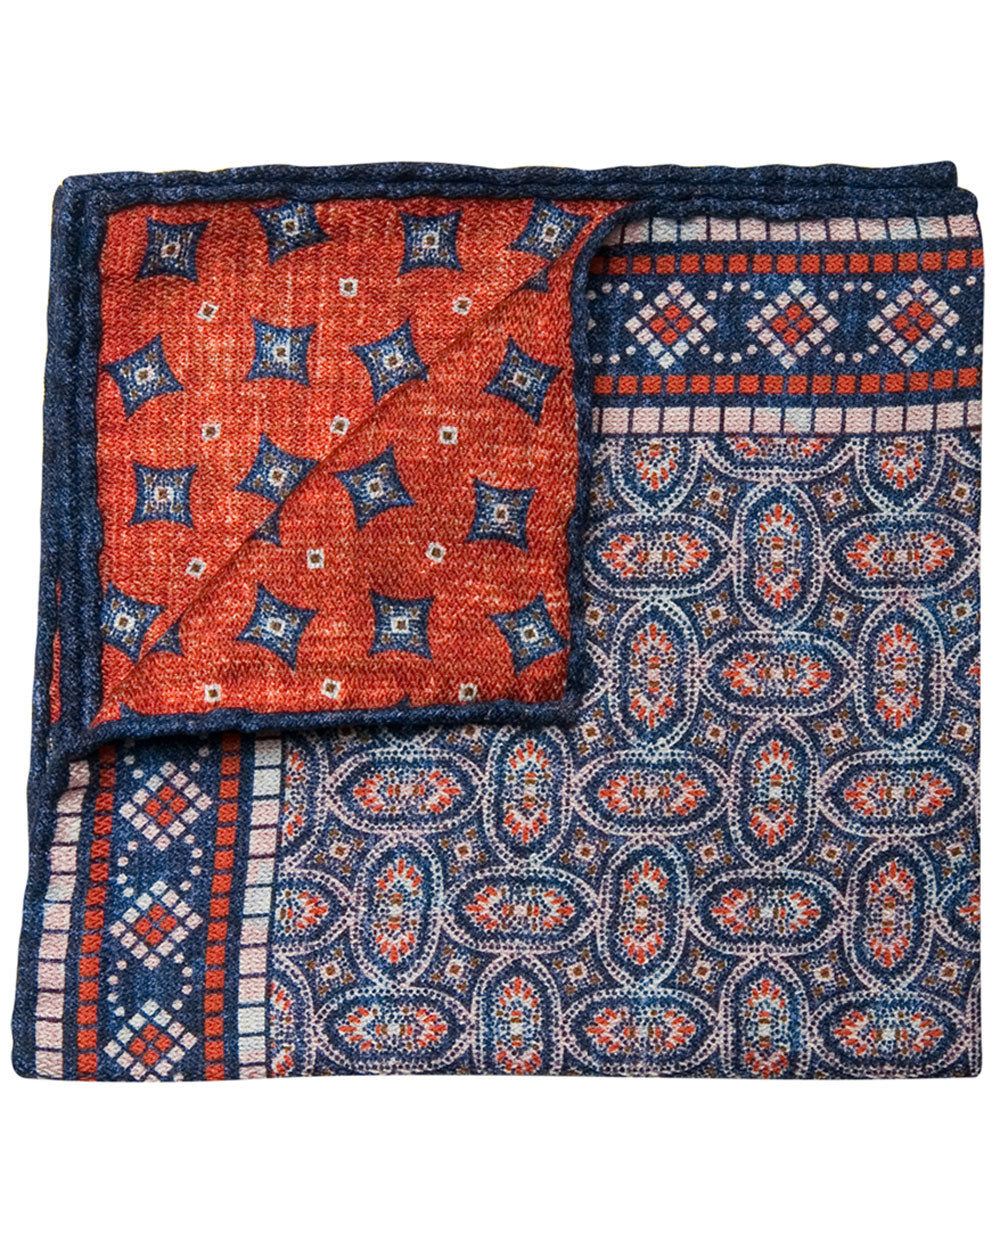 Oval Neat Print Pocket Square in Navy and Orange